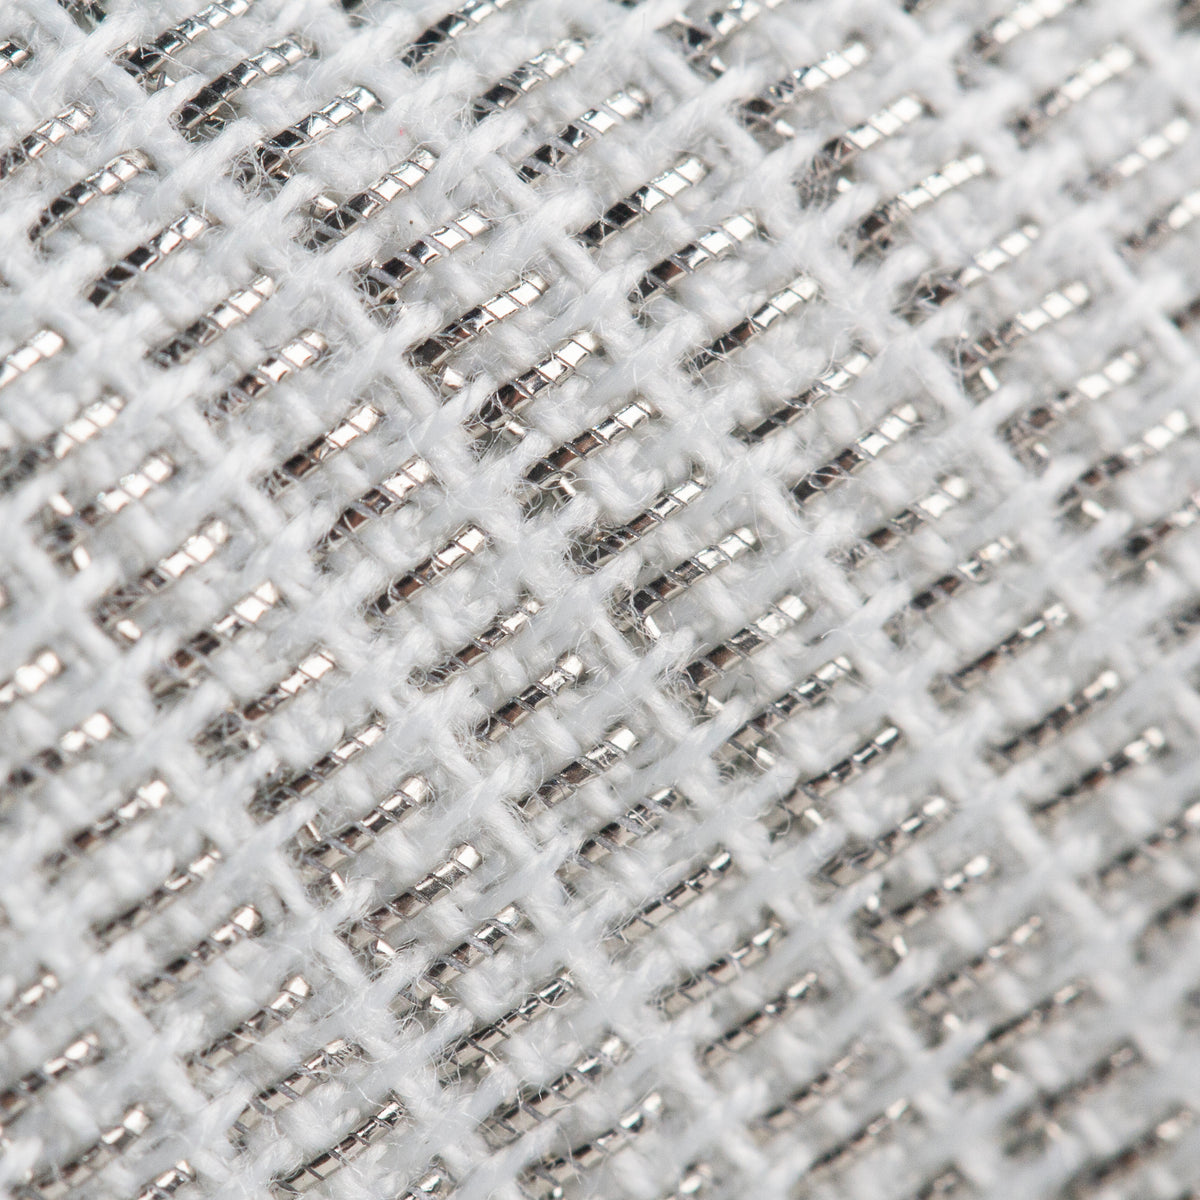 Fencing Conductive Fabric made from nickel fiber with miliohm level conductivity